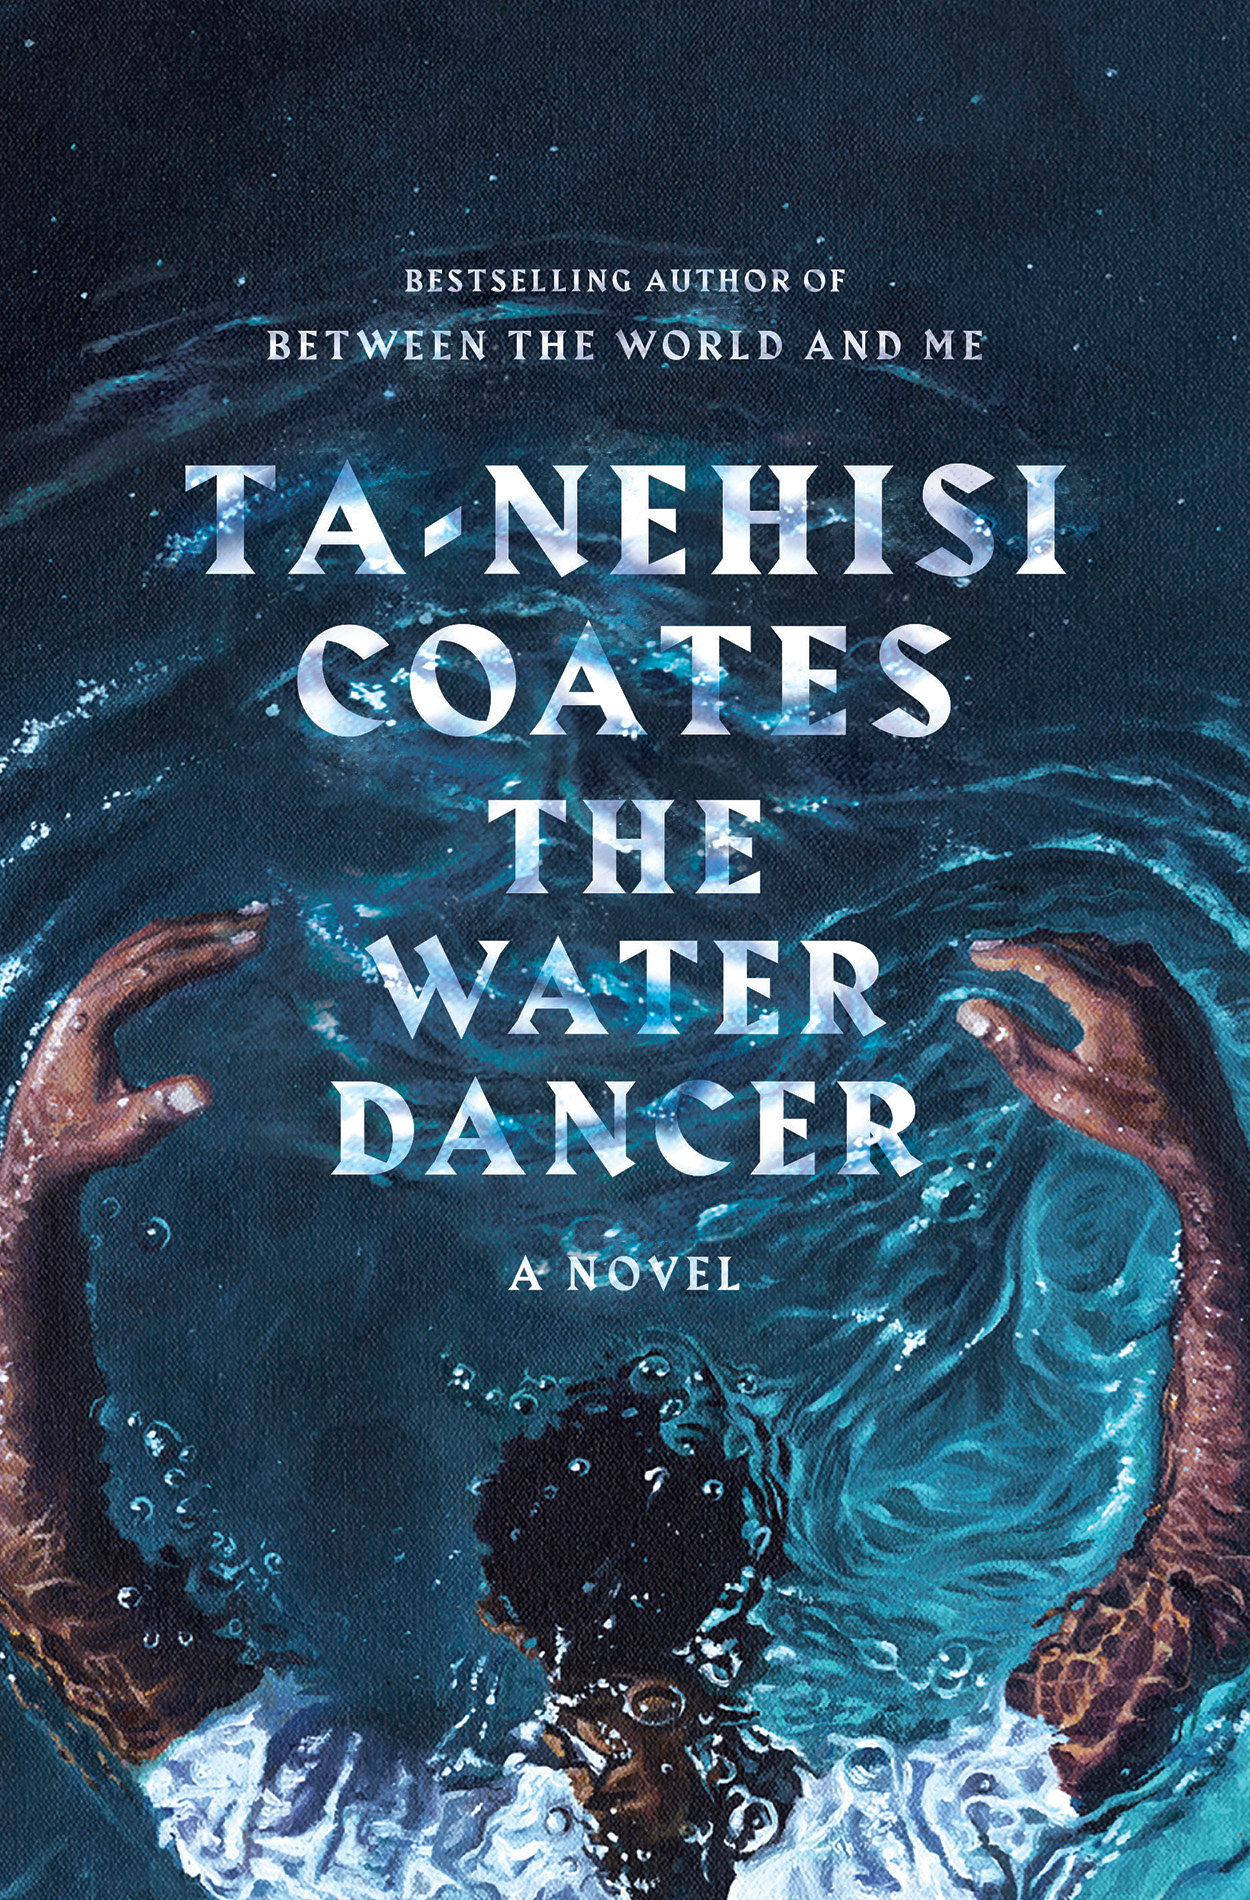 The cover of Ta-Nehisi Coates' novel, The Water Dancer. It depicts a black man wearing a white shirt with his arms outstretched and body partially submerged in water.